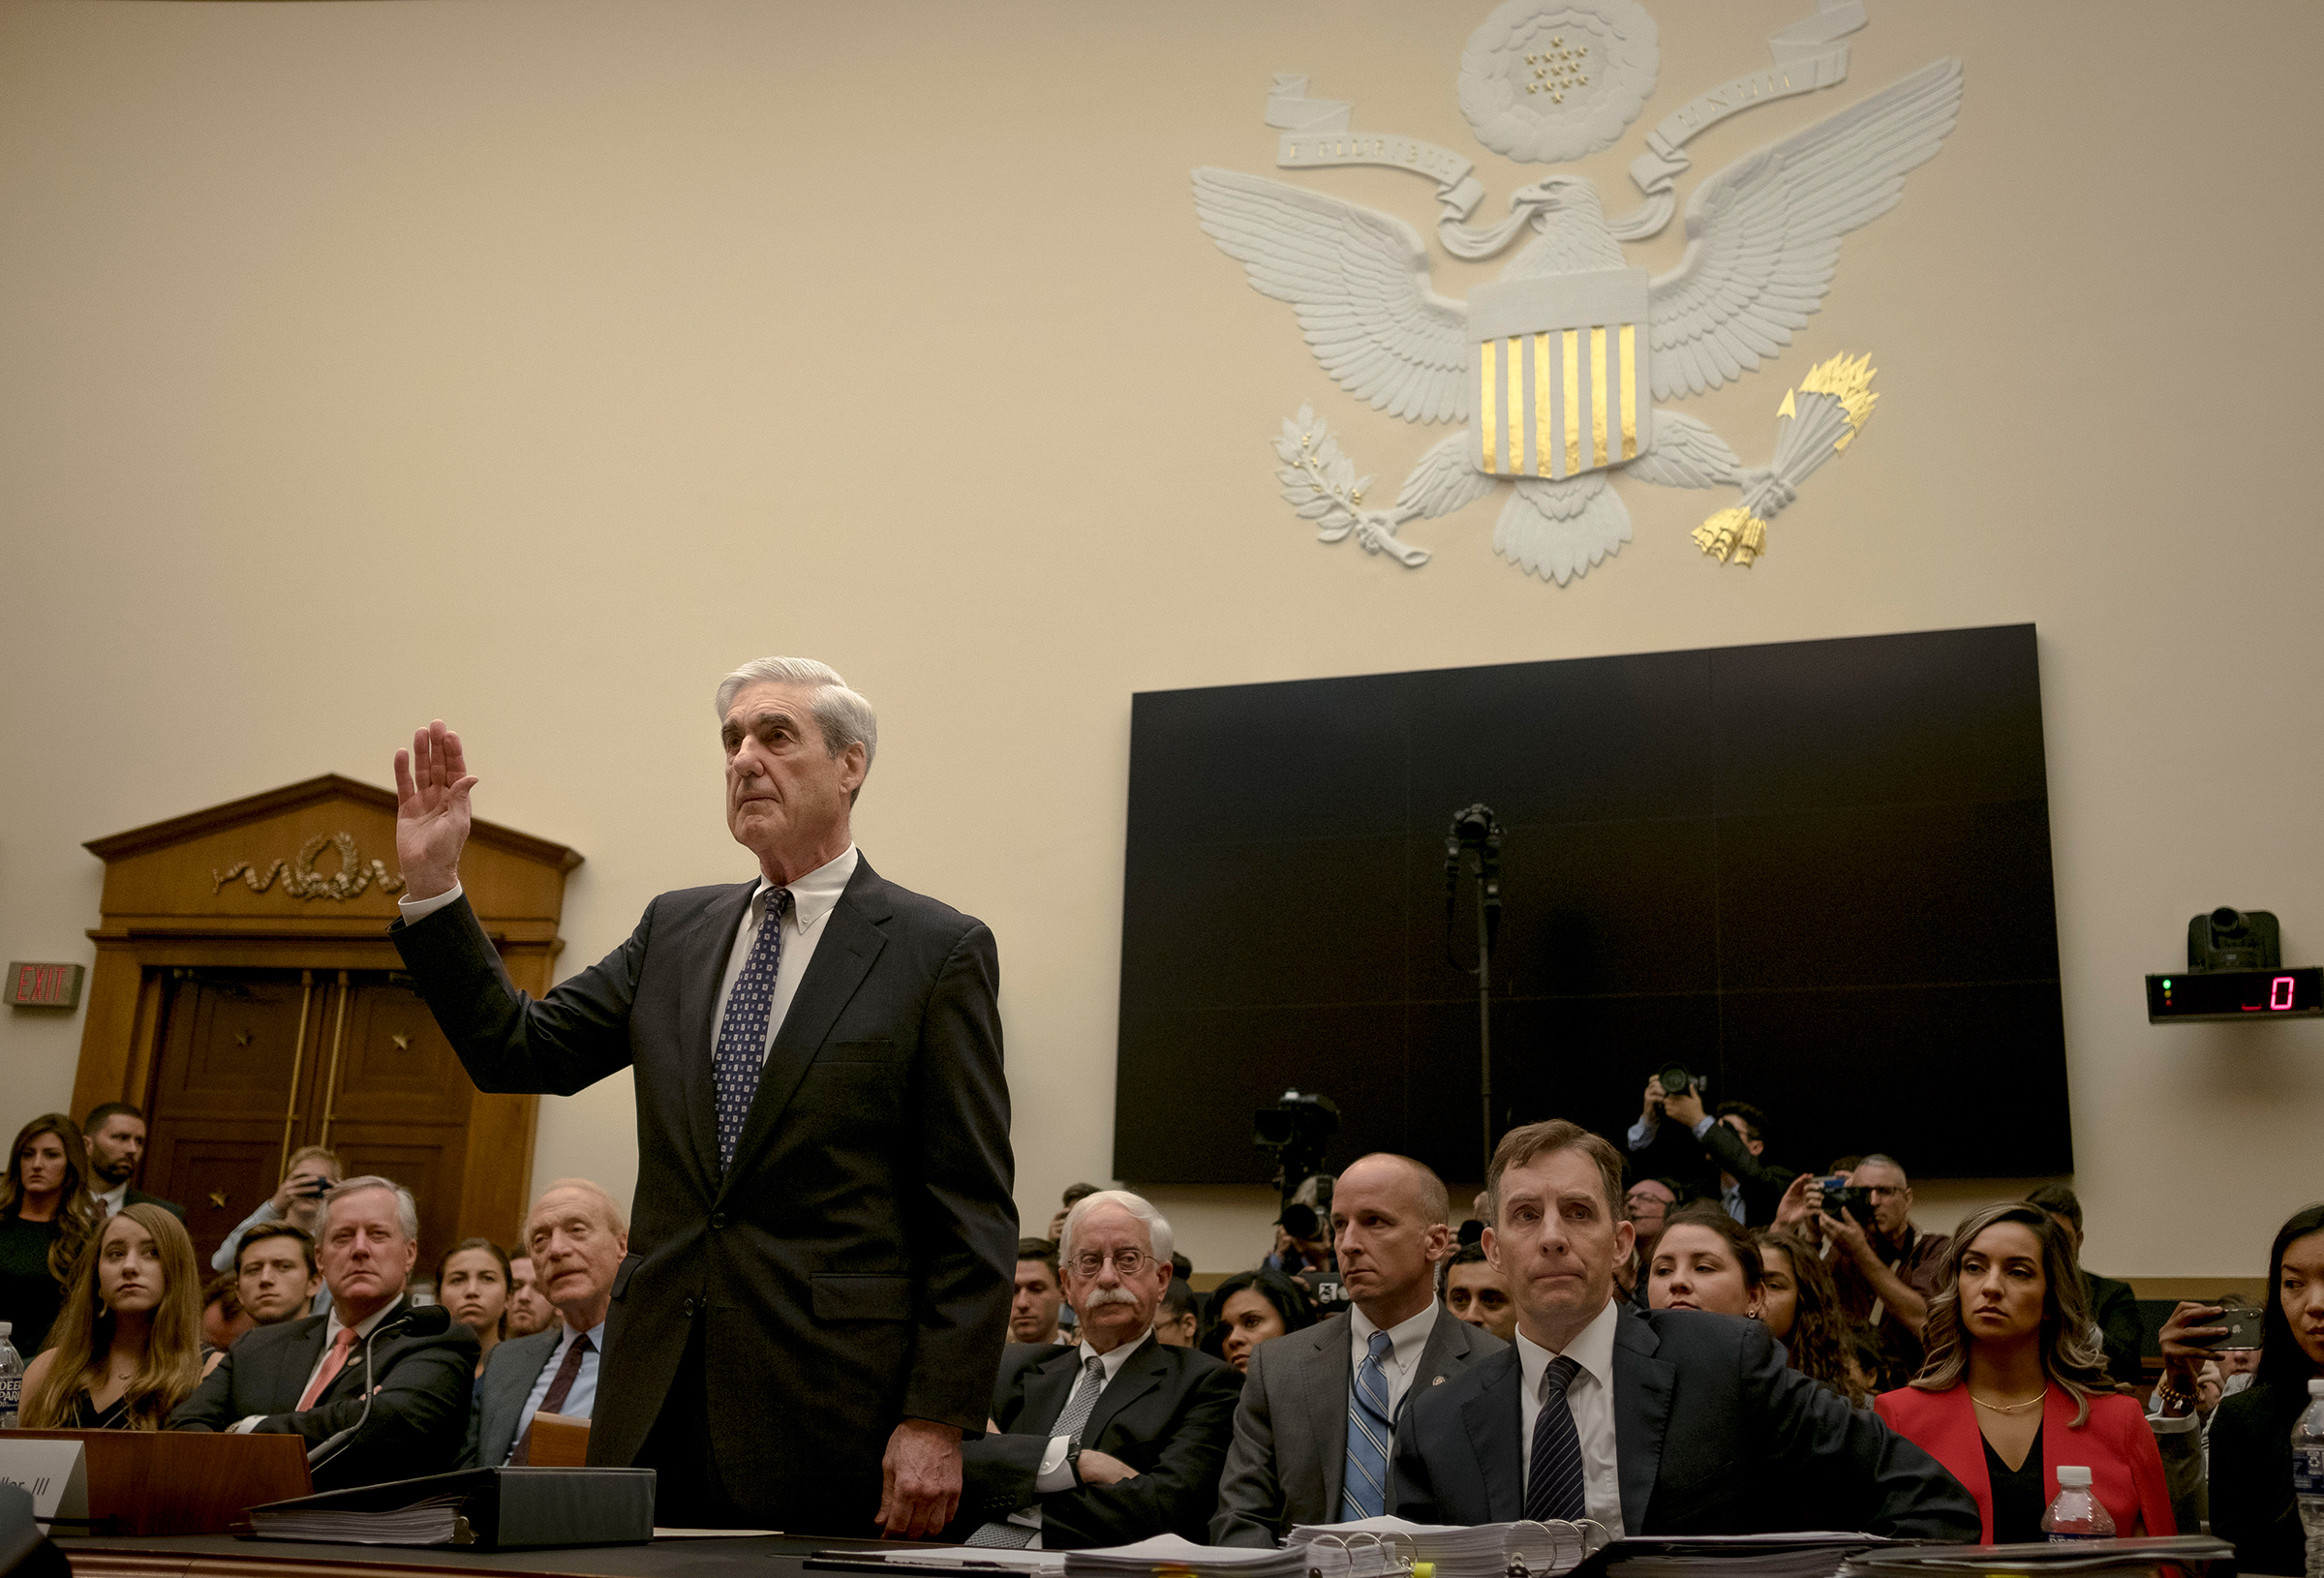 Former Special Counsel Robert Mueller is sworn in before the House Judiciary Committee in Washington, D.C., on July 24, 2019. (Gabriella Demczuk for TIME)